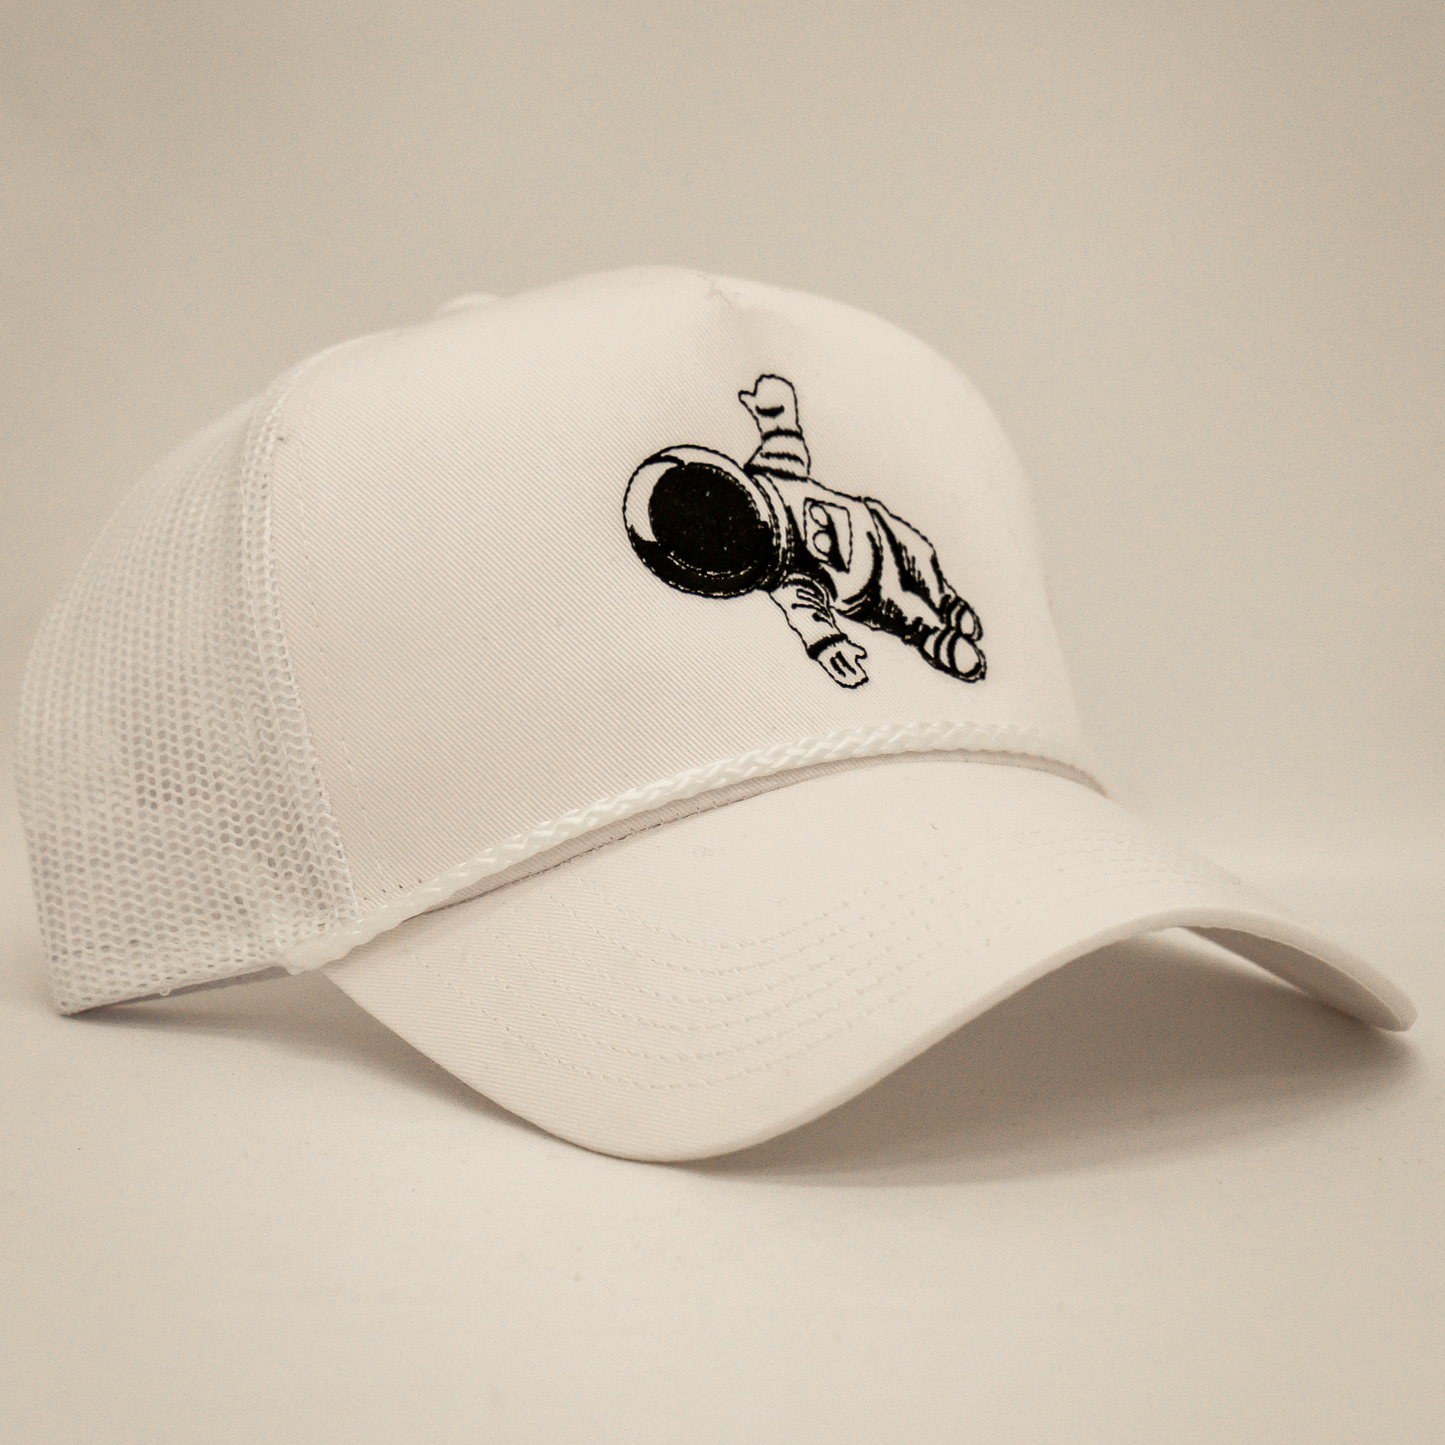 The Astro Rope Trucker Hat